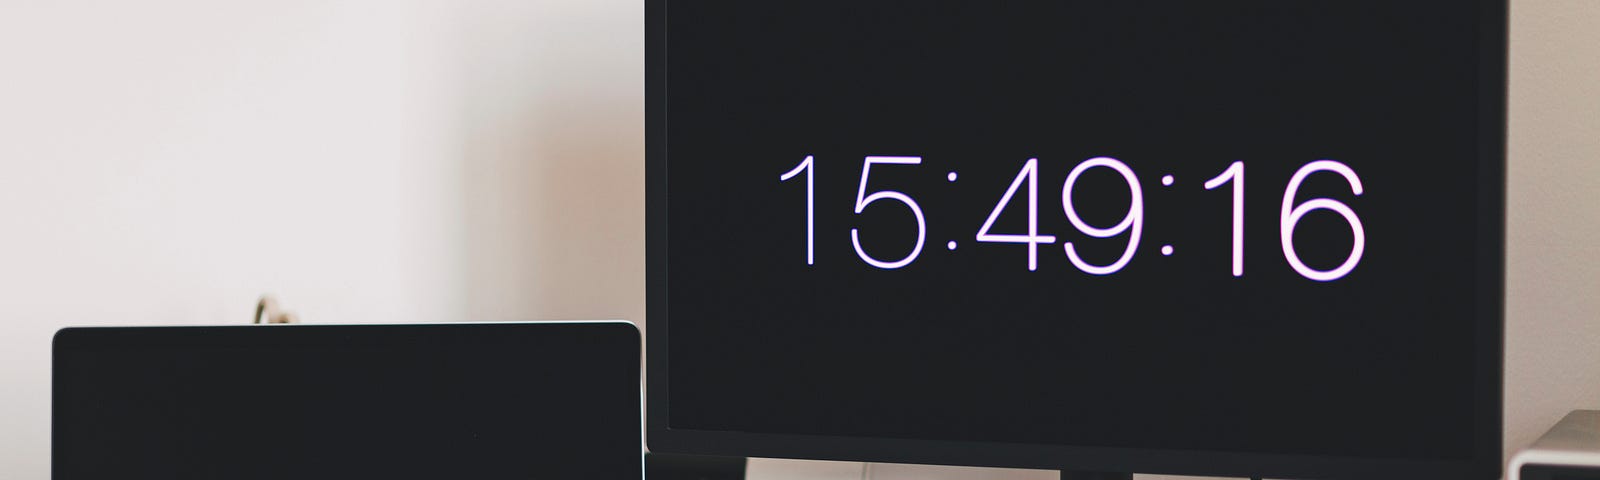 Two screens with time displayed